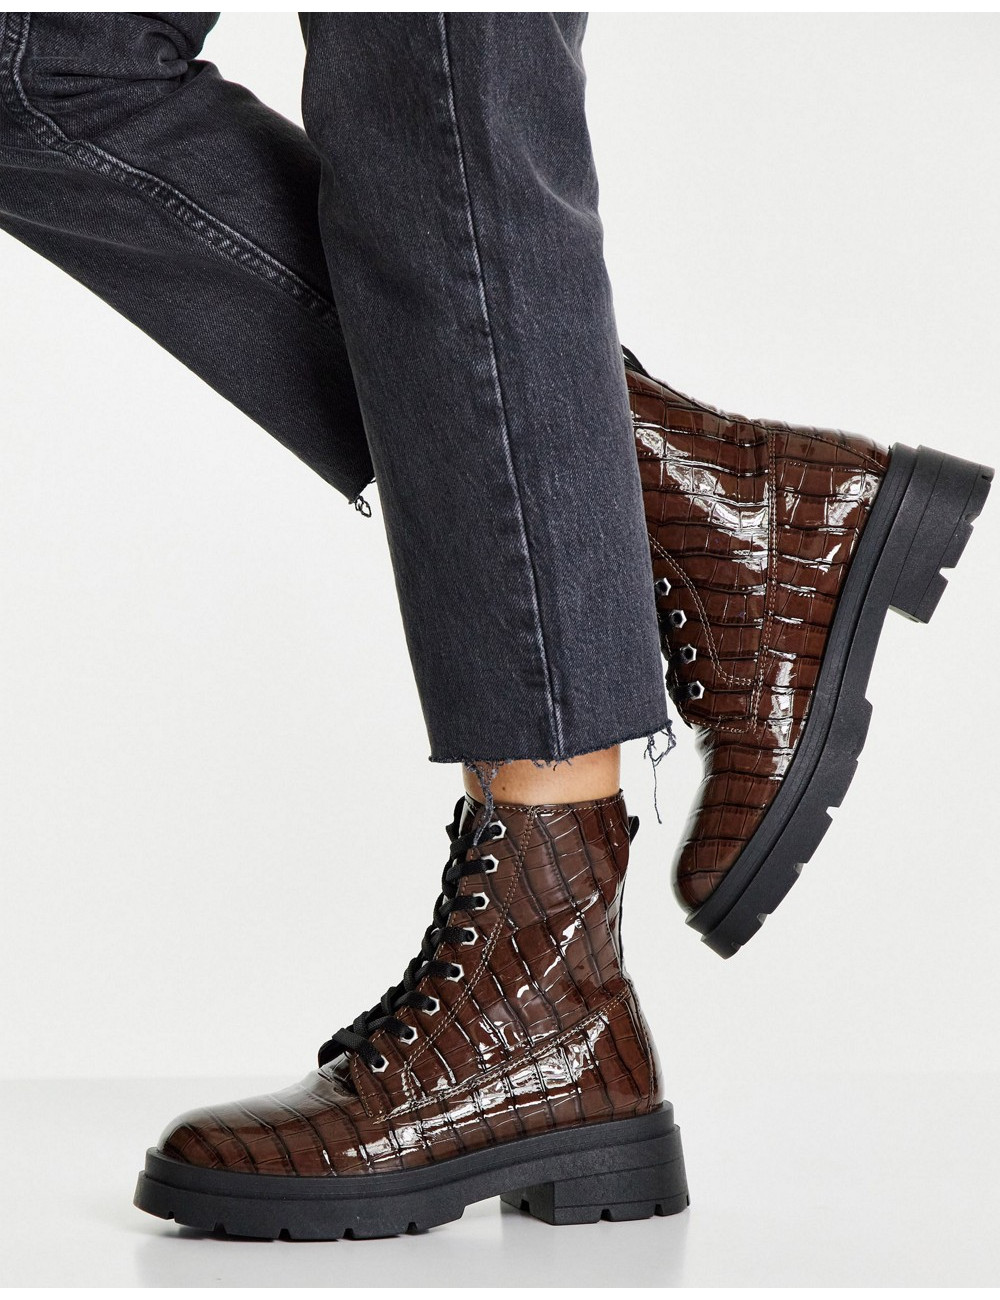 Topshop Kali lace up boot...